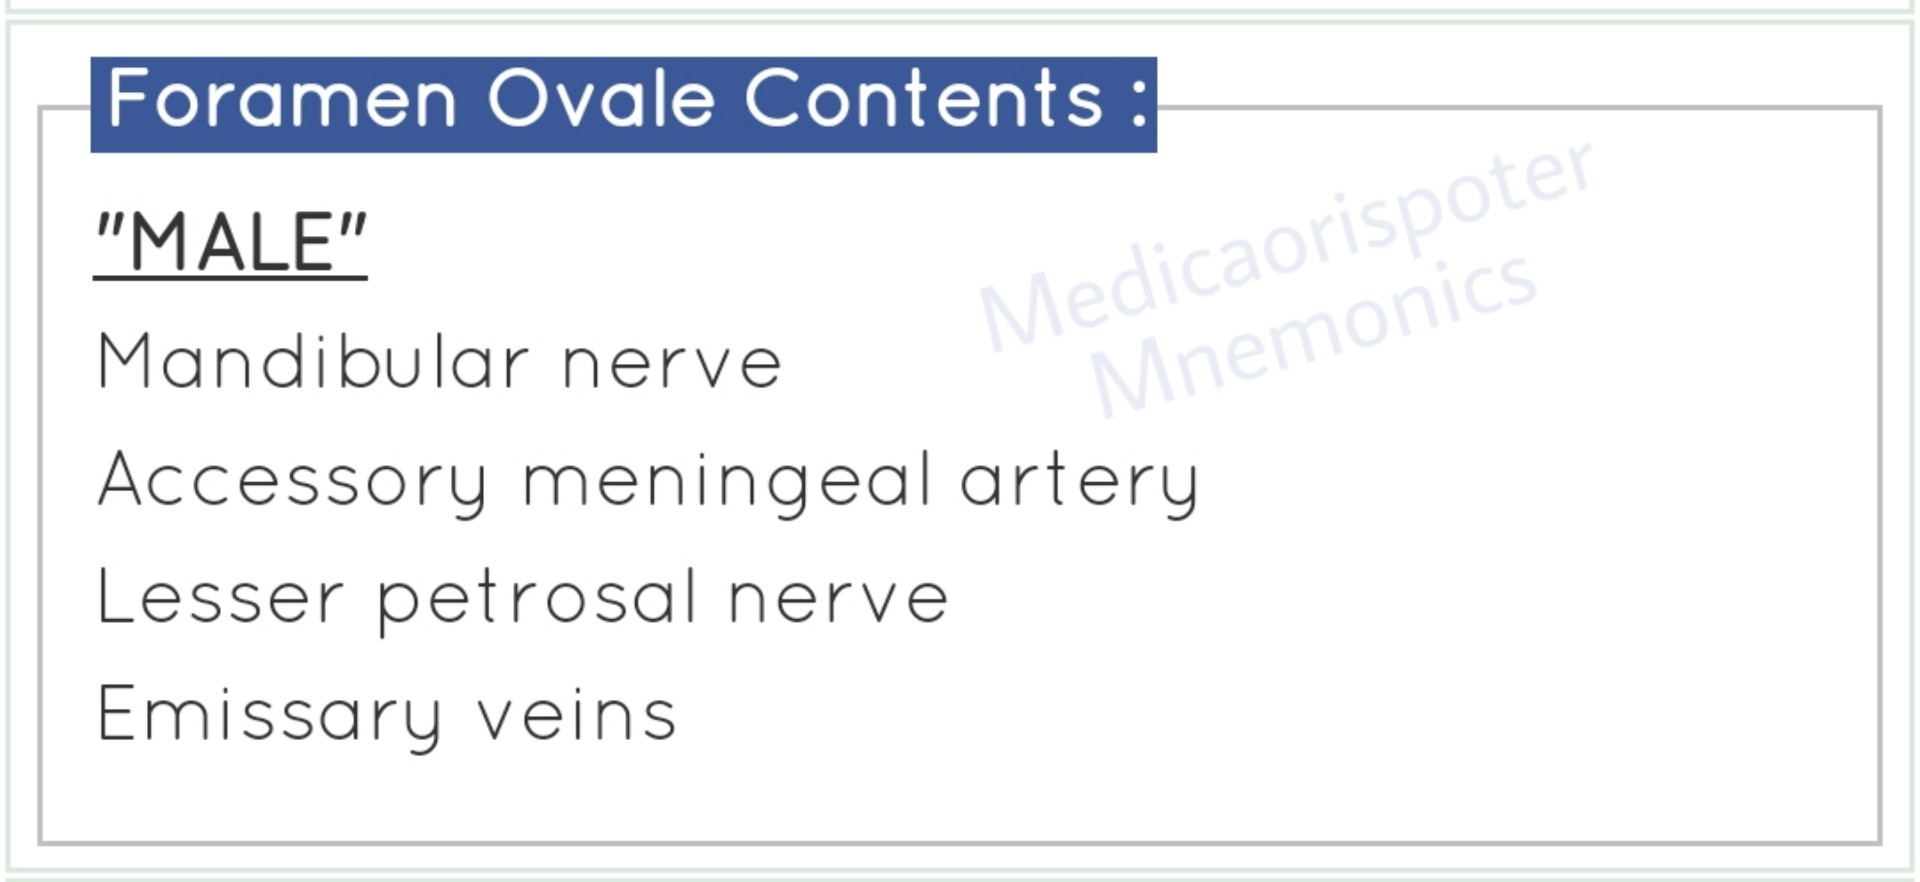 Contents_of_Foramen_Ovale